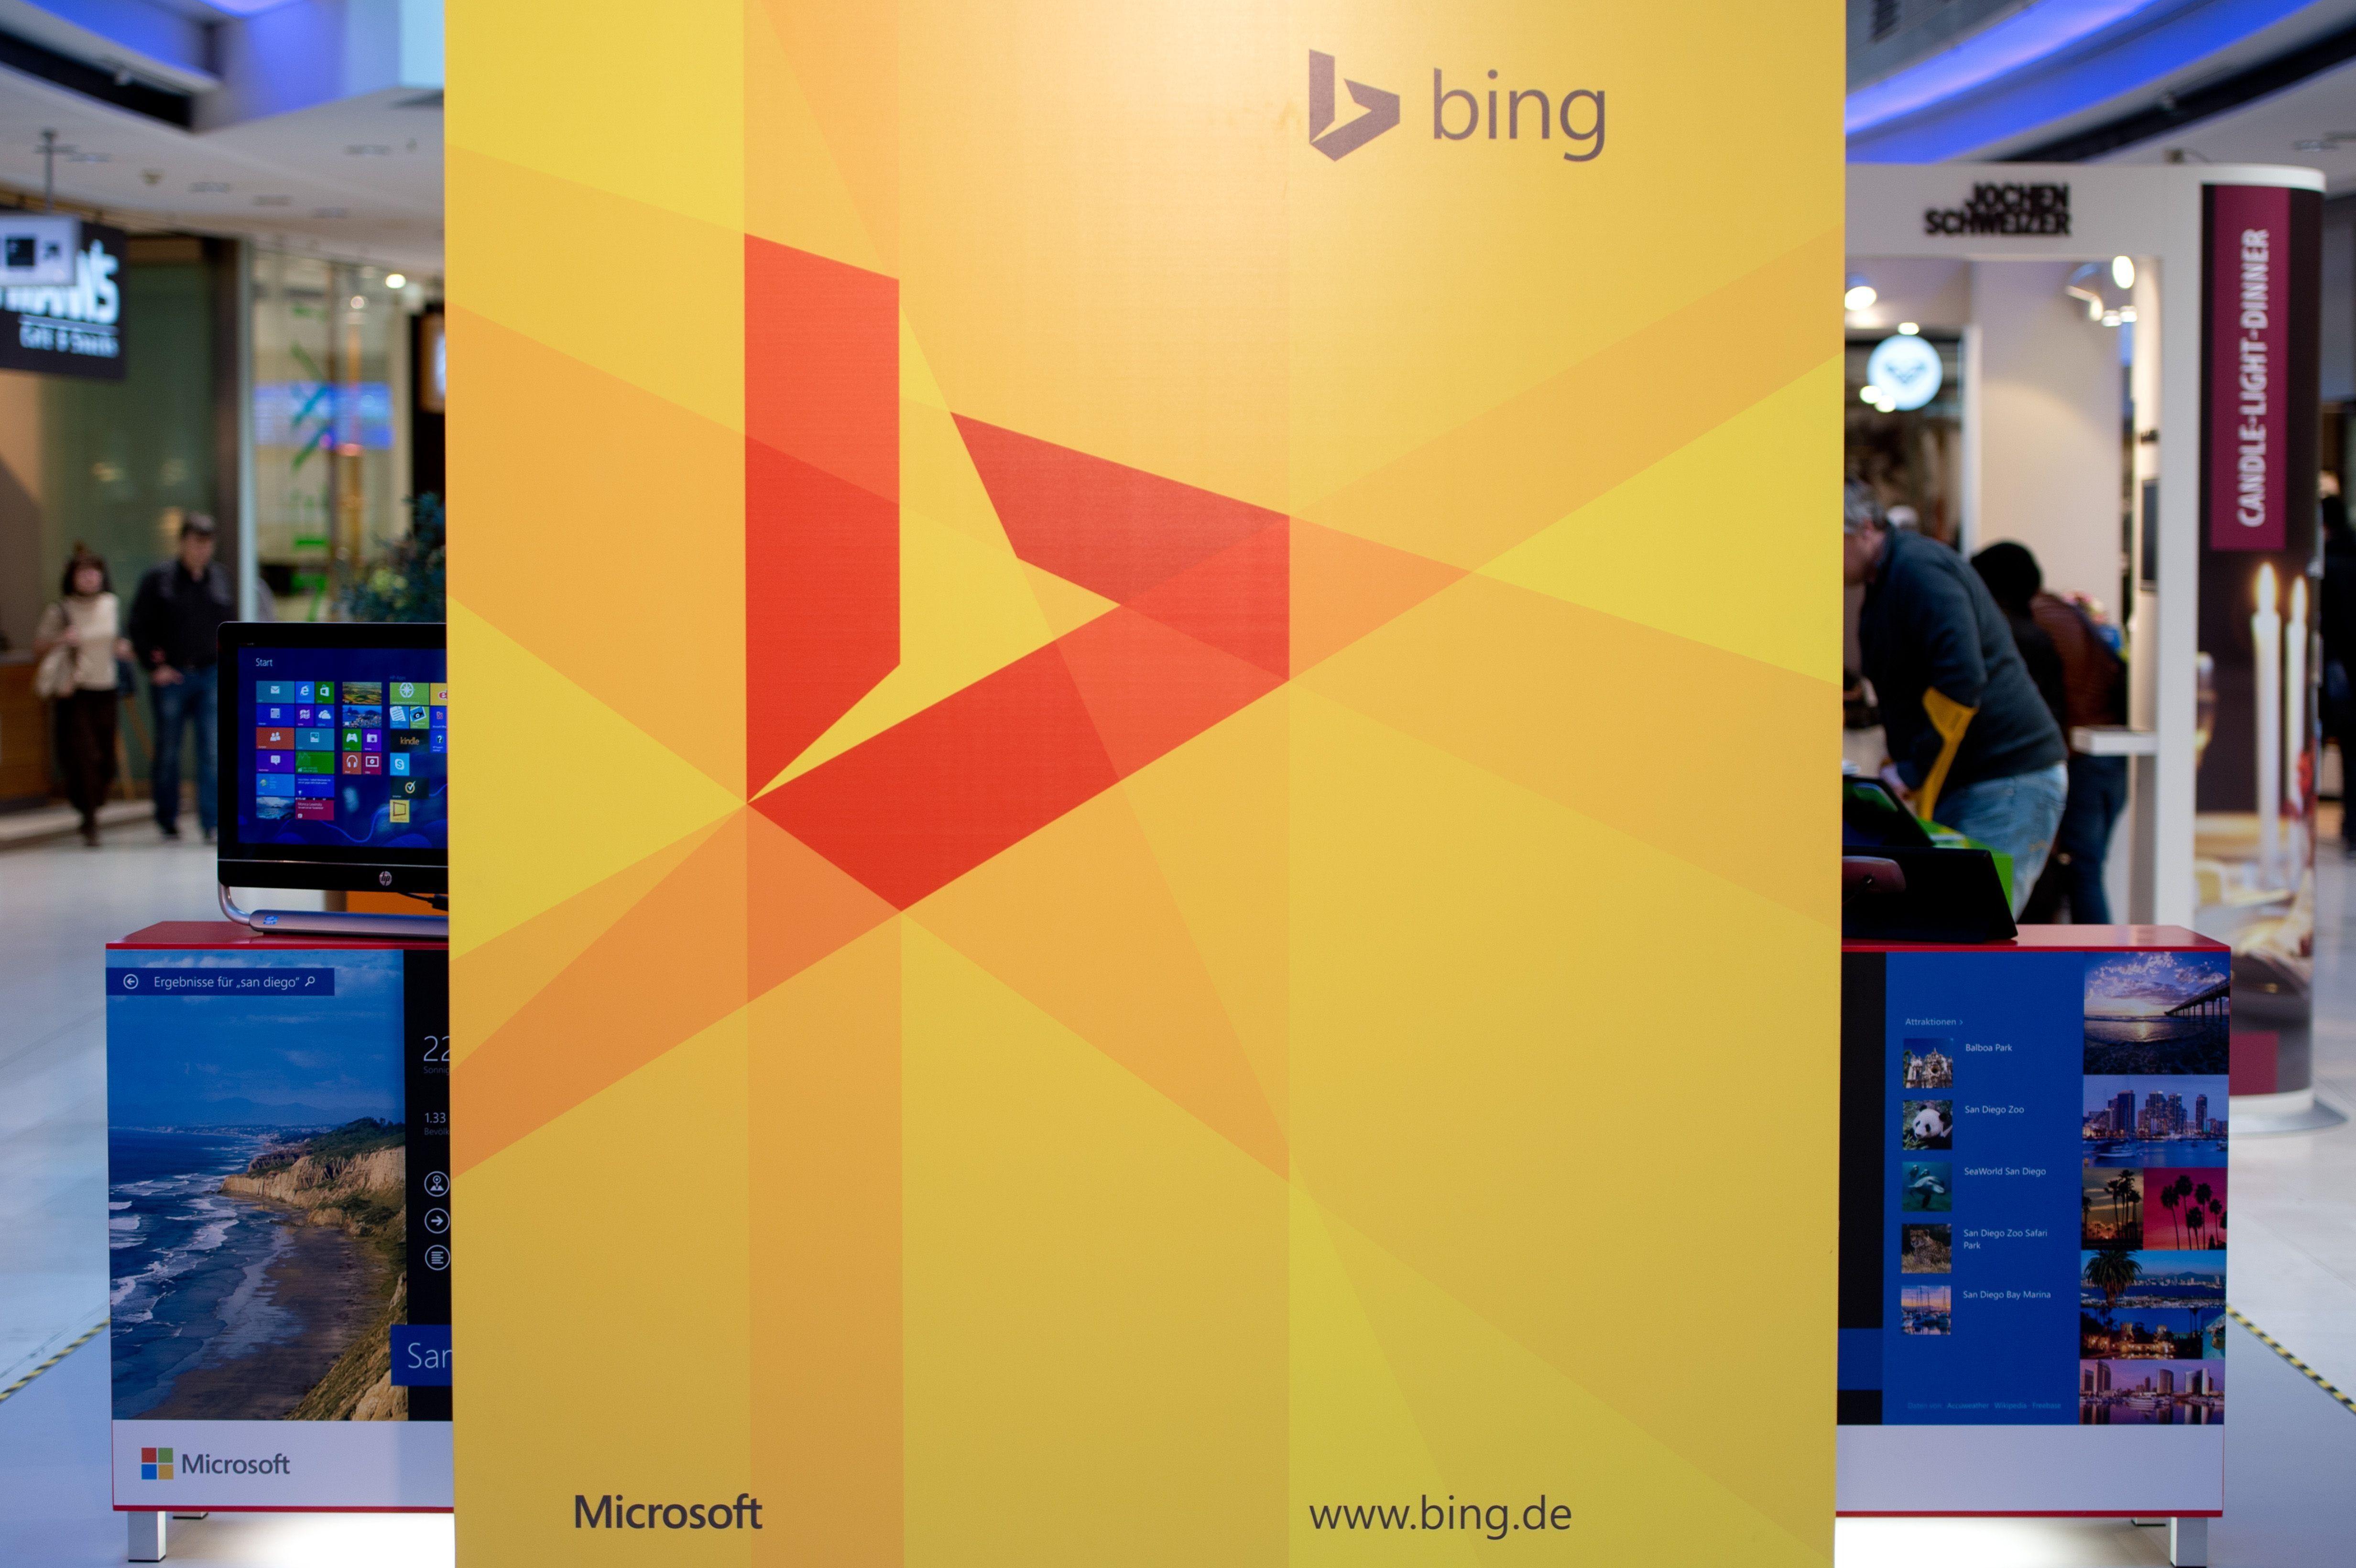 Microsoft Bing Logo - Microsoft's Bing Search Engine Is Finally Proiftable | Time